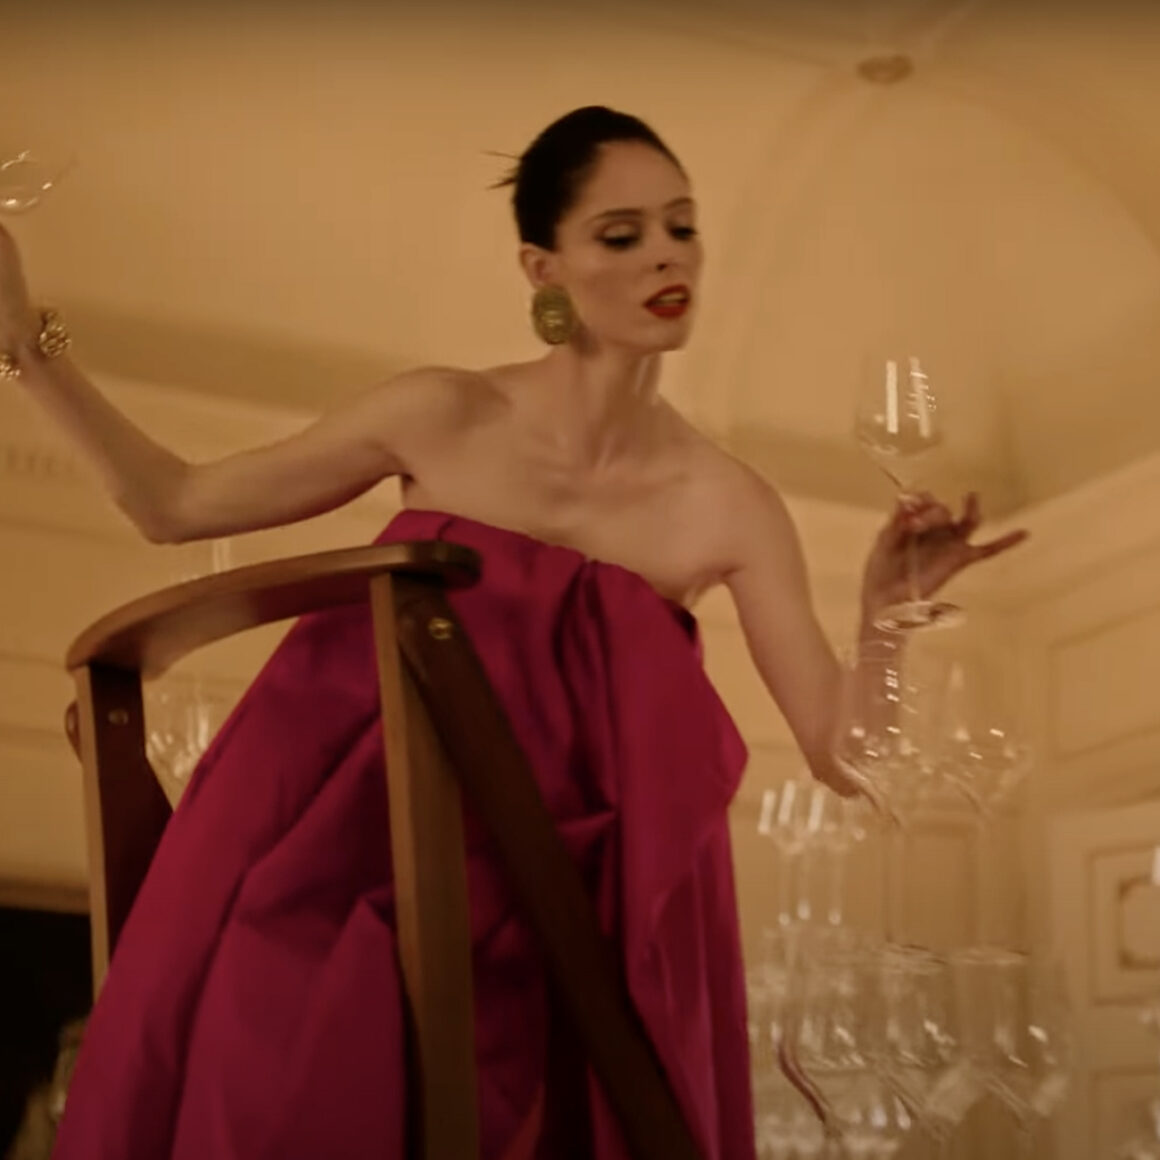 Fonte immagine The iconic moments with Moët & Chandon YouTube, MKTG WideSpirit